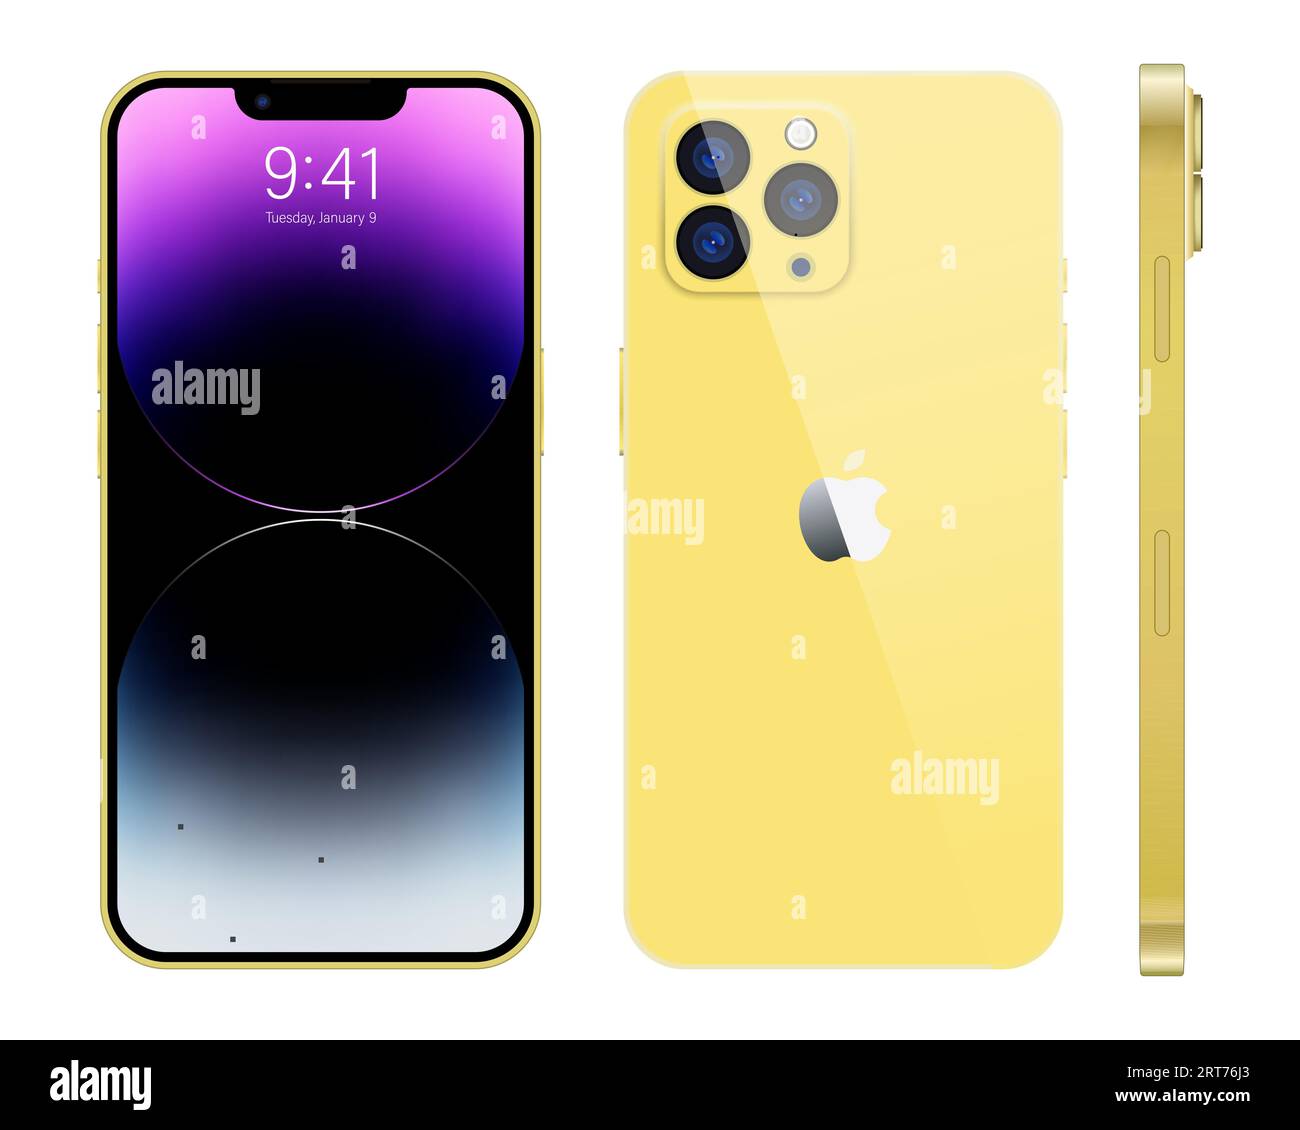 New iPhone 15 pro, pro max Deep yellow color by Apple Inc. Mock-up screen iphone and back side iphone. High Quality. Official presentation. Editorial. Stock Vector